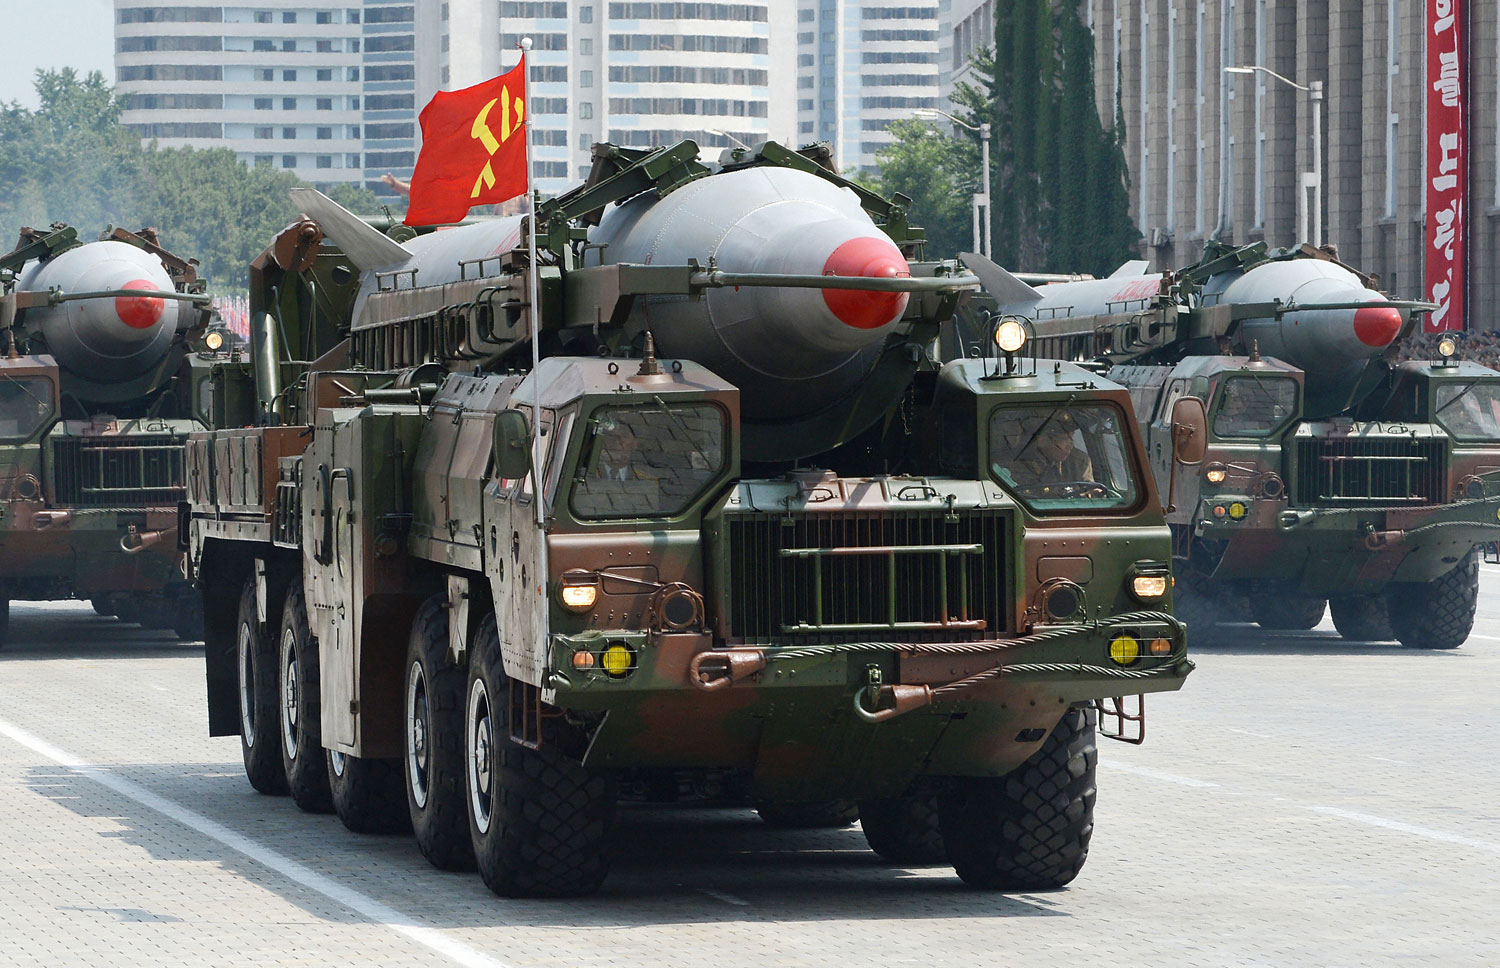 Rodong medium-range ballistic missiles in a military parade at Kim Il Sung Square in Pyongyang in July 2013 (Kyodo/AP)